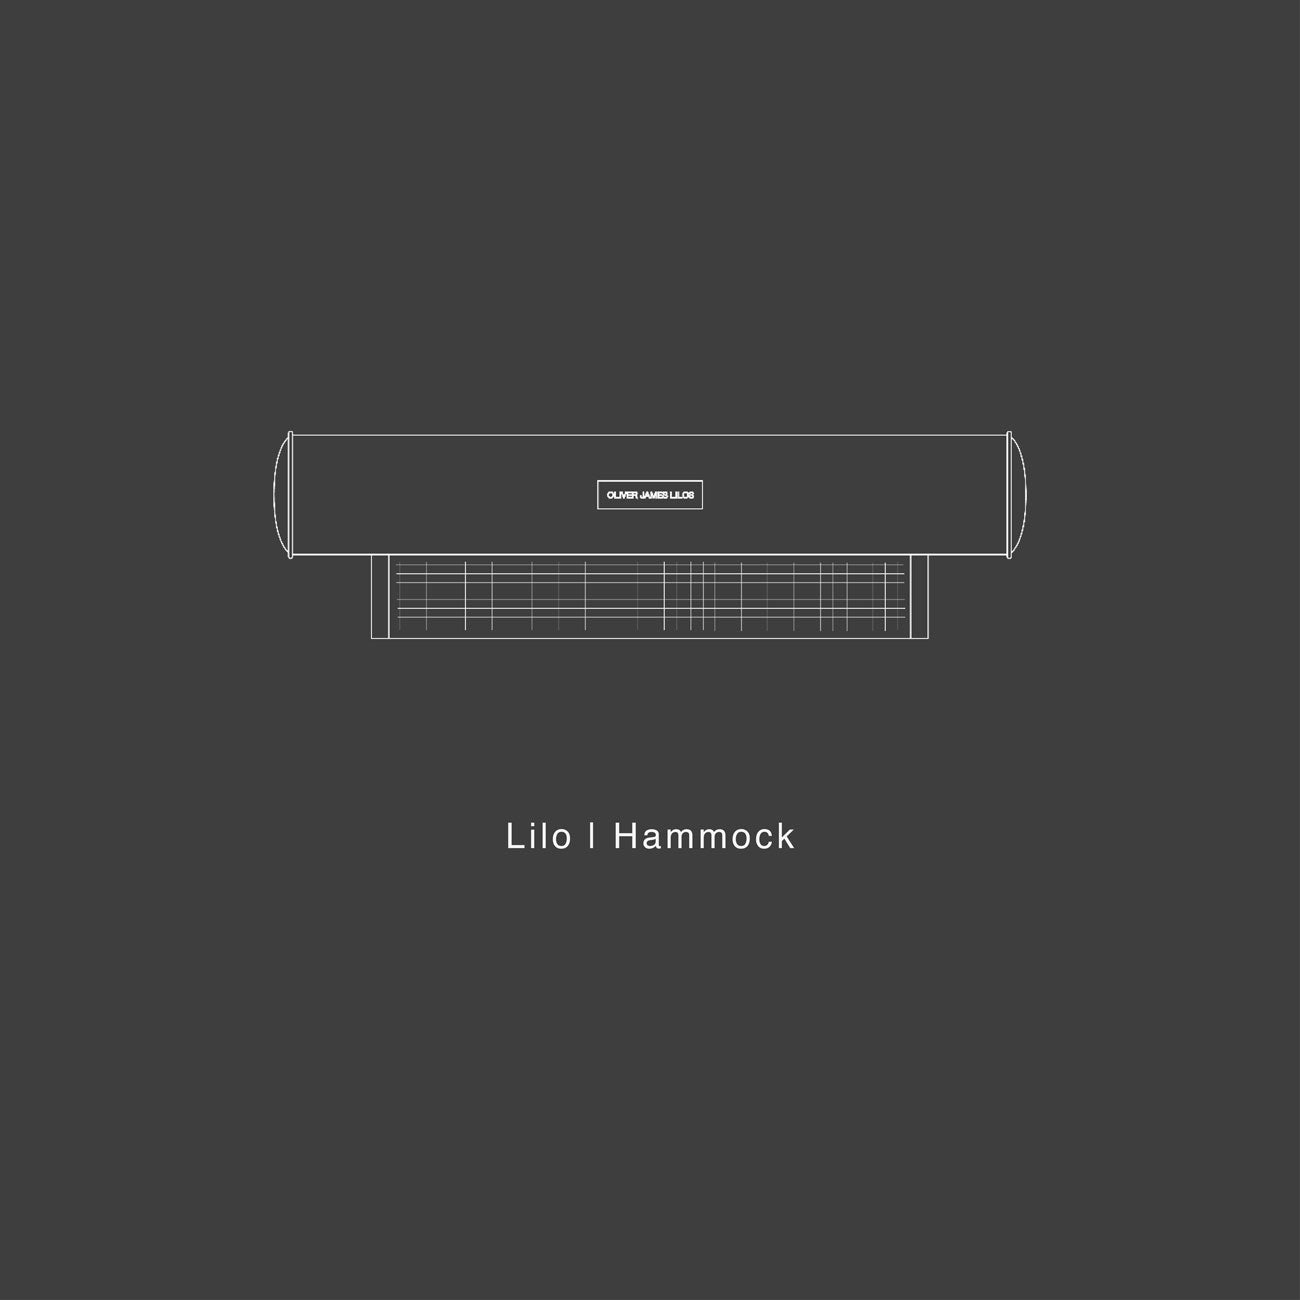 A holding image for the User Manual of a luxury hammock pool float by Oliver James Lilos.